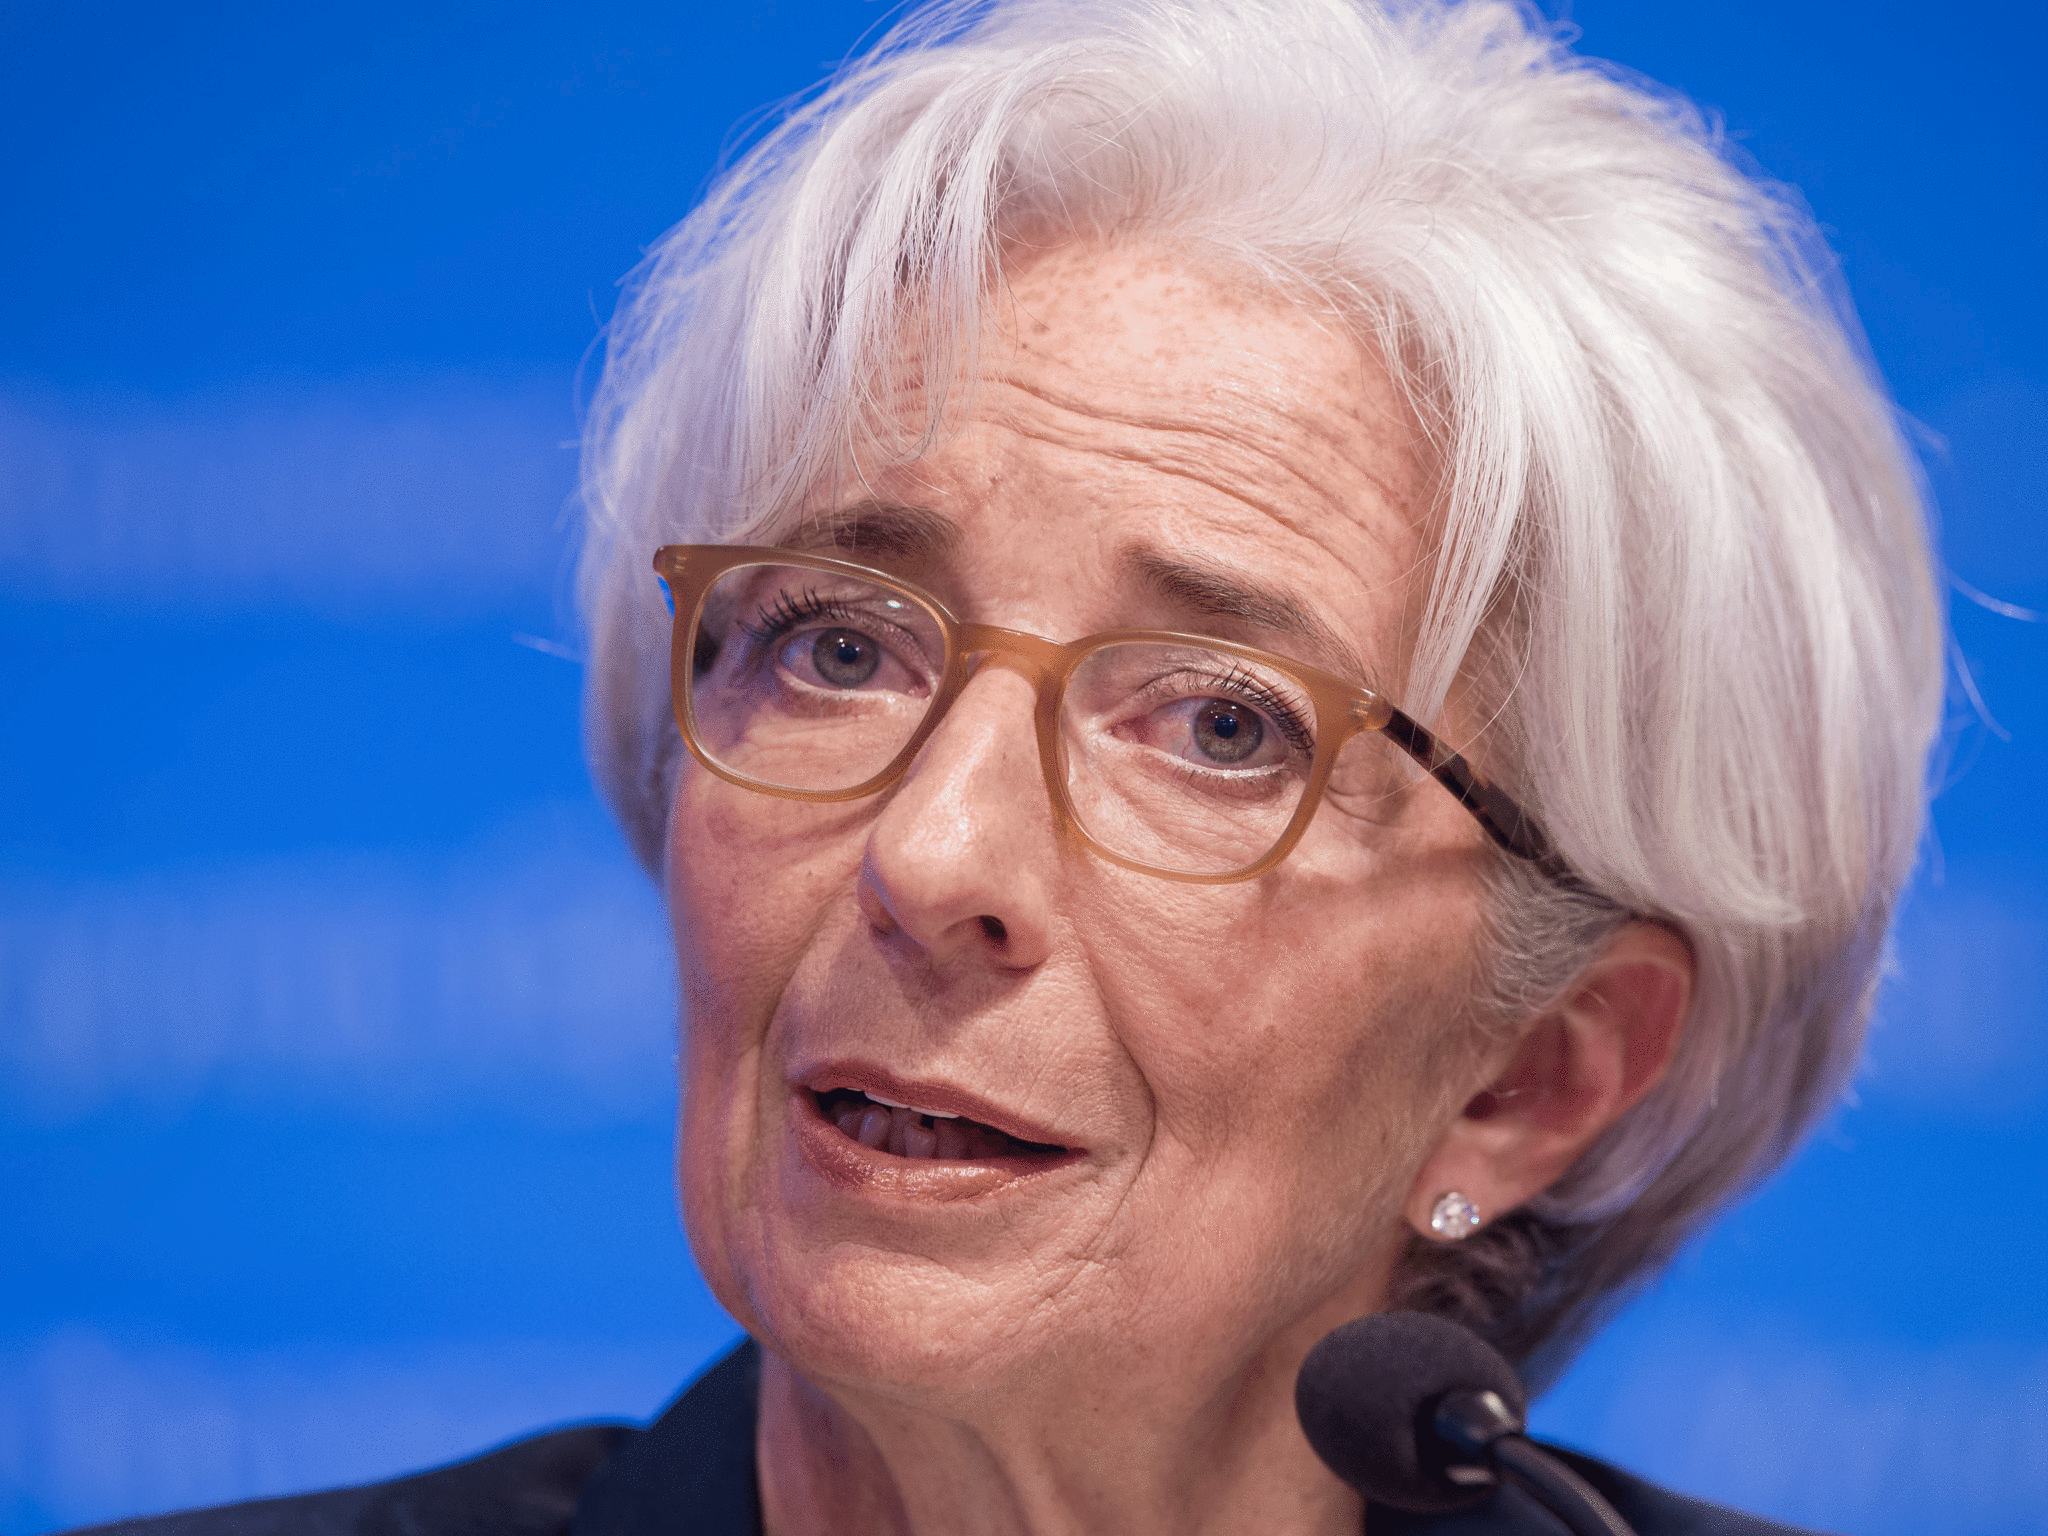 IMF urges Europe to provide 'significant' debt relief to Greece following bailout agreement